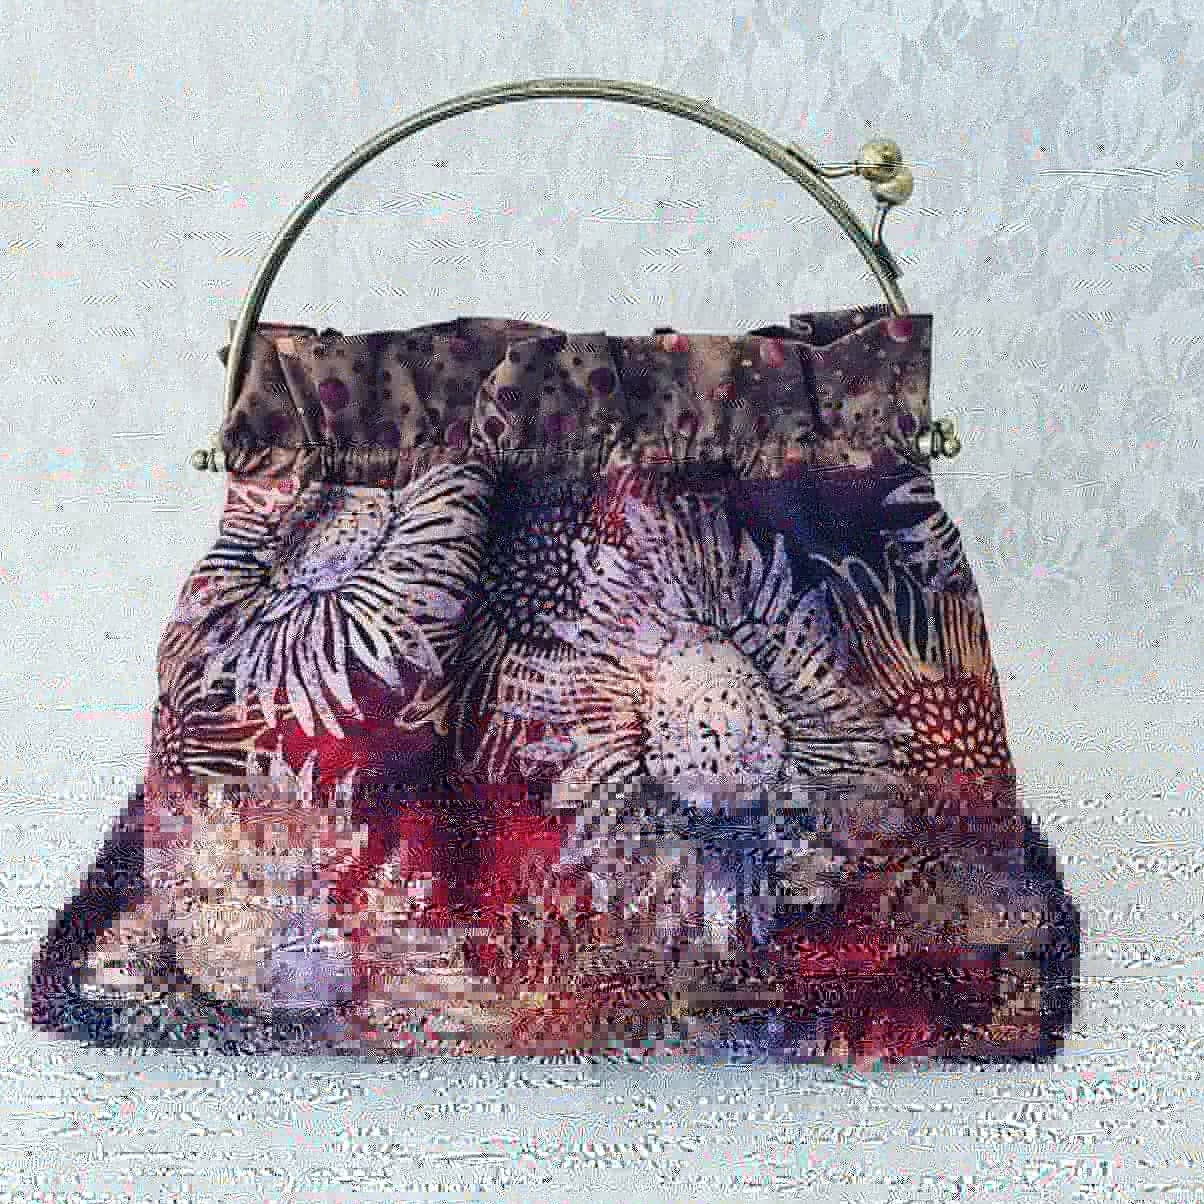 Handmade Purse ~ Vintage Style Clasp Clutch Handbag ~ Sewing ~ Makeup ~ Perfect for Phone and Essentials